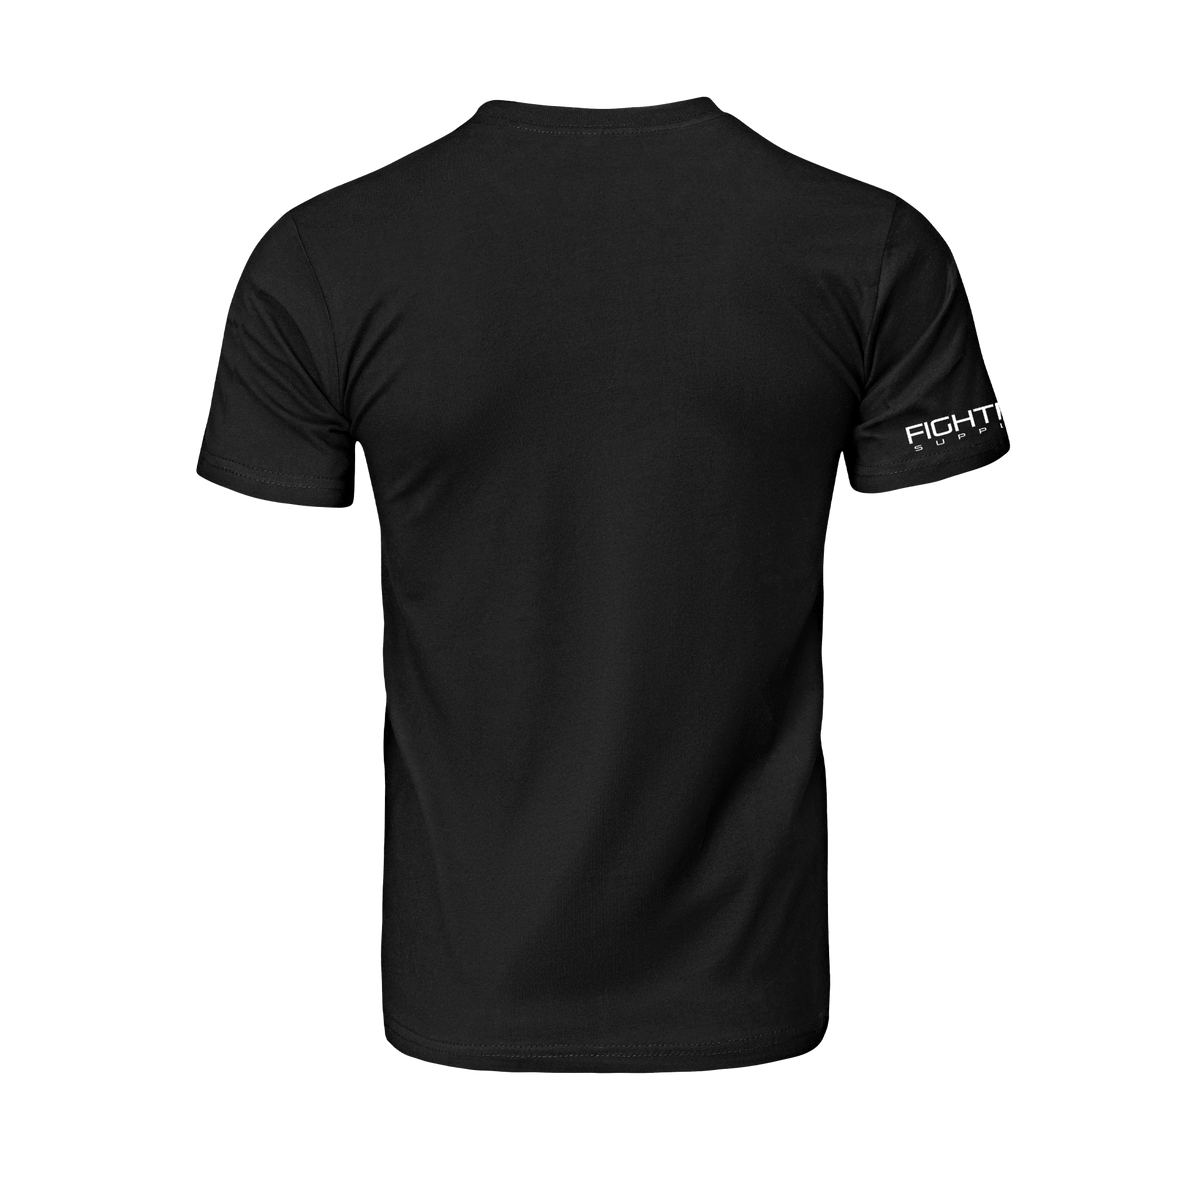 Washed FPS logo matched with the Rapid Targeting and Cognition company creed. Ultra-soft athletic-cut made with dual-blend fabric with just the right amount of stretch.